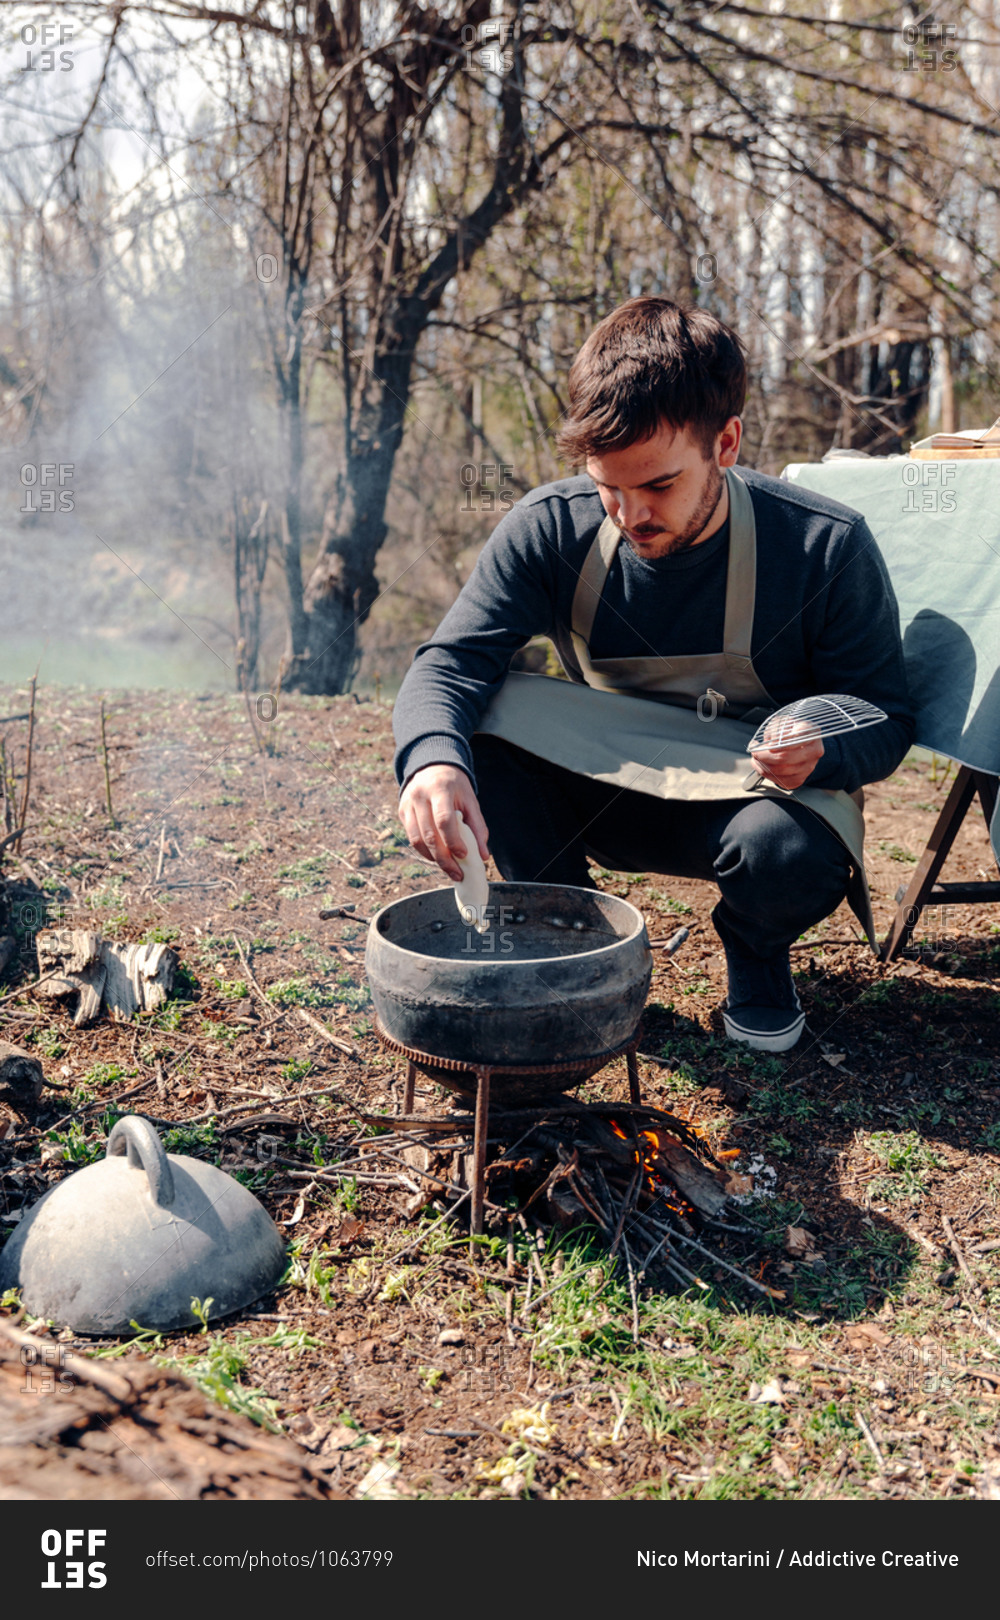 Cook in apron preparing lunch while putting pasty in boiling oil in pot on campfire